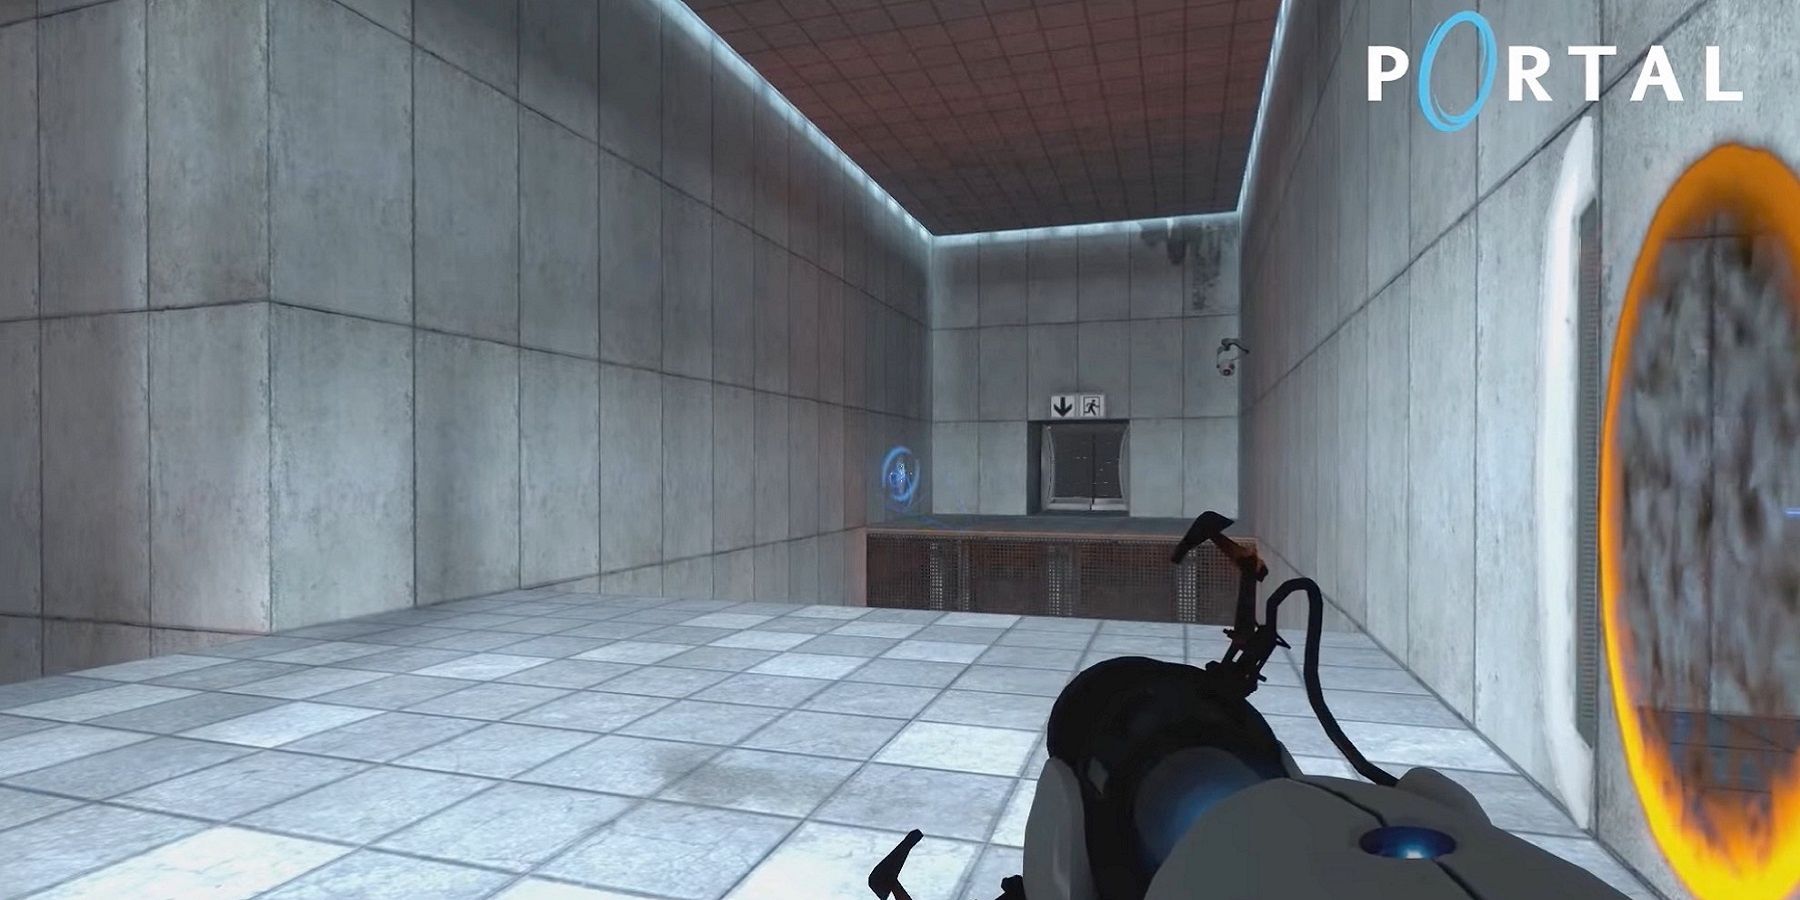 Screenshot from Portal with the game logo in the top right corner.